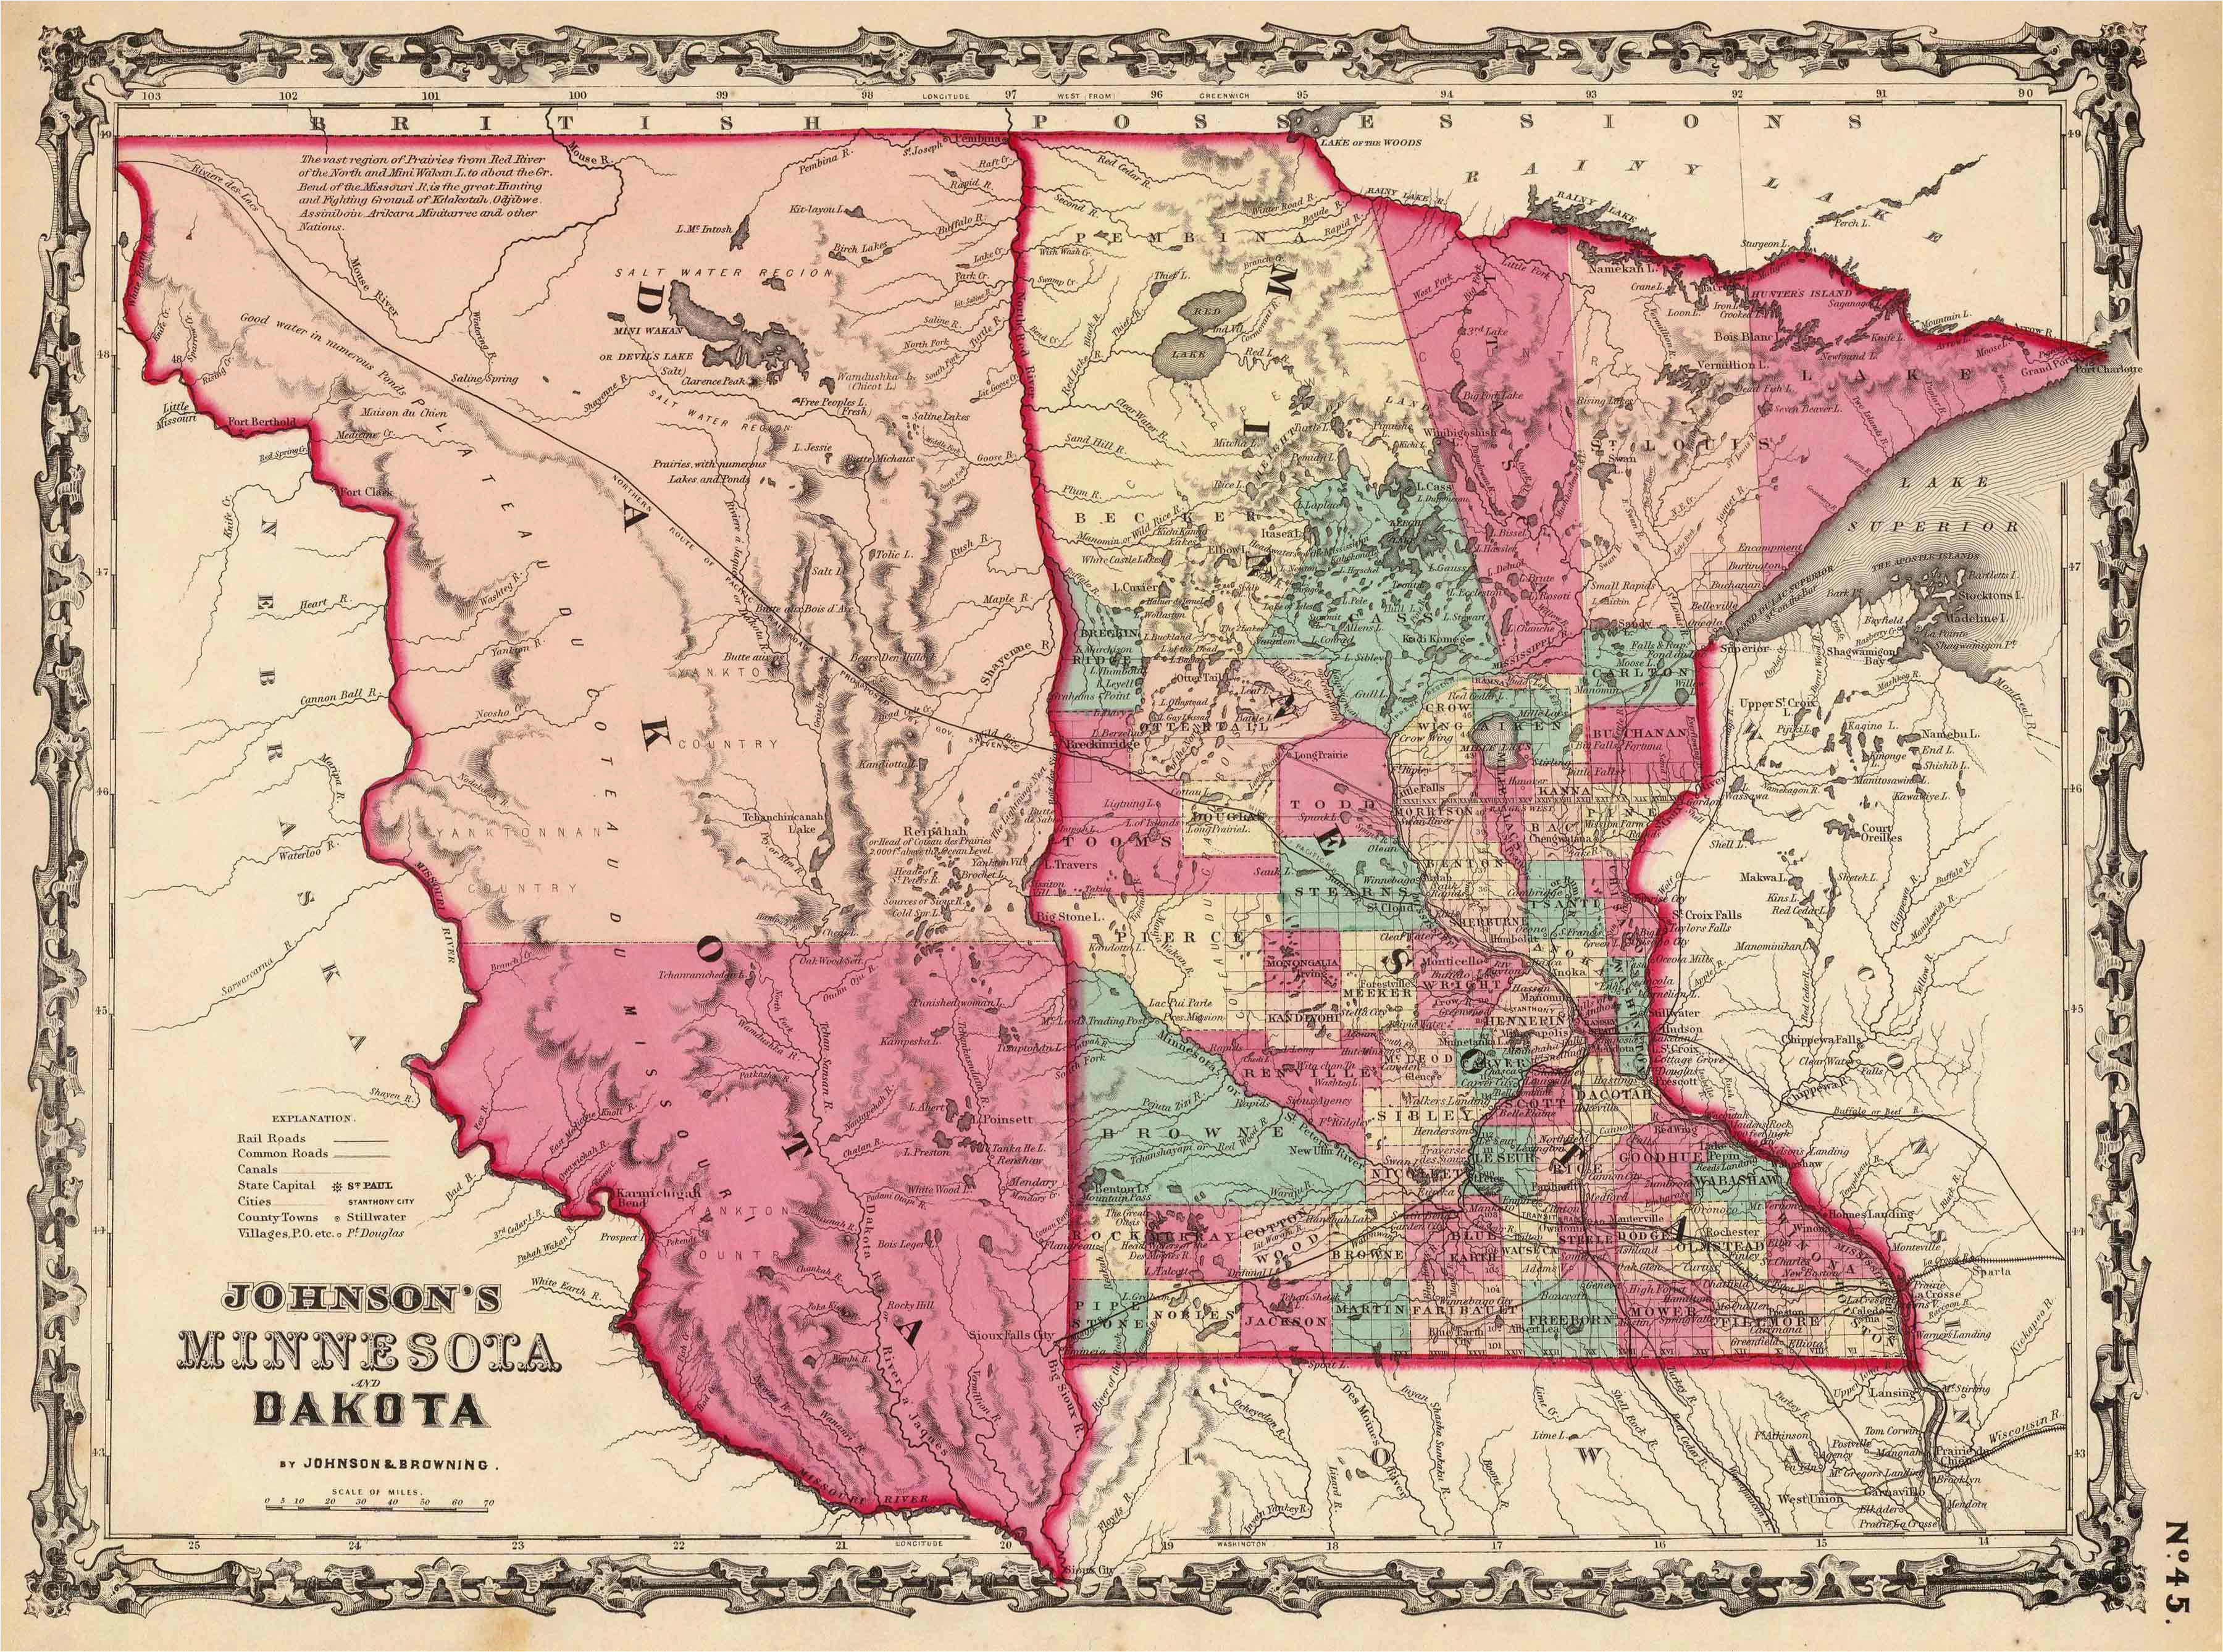 Dakota Minnesota And Eastern Railroad Map Old Historical City County And State Maps Of Minnesota Of Dakota Minnesota And Eastern Railroad Map 2 